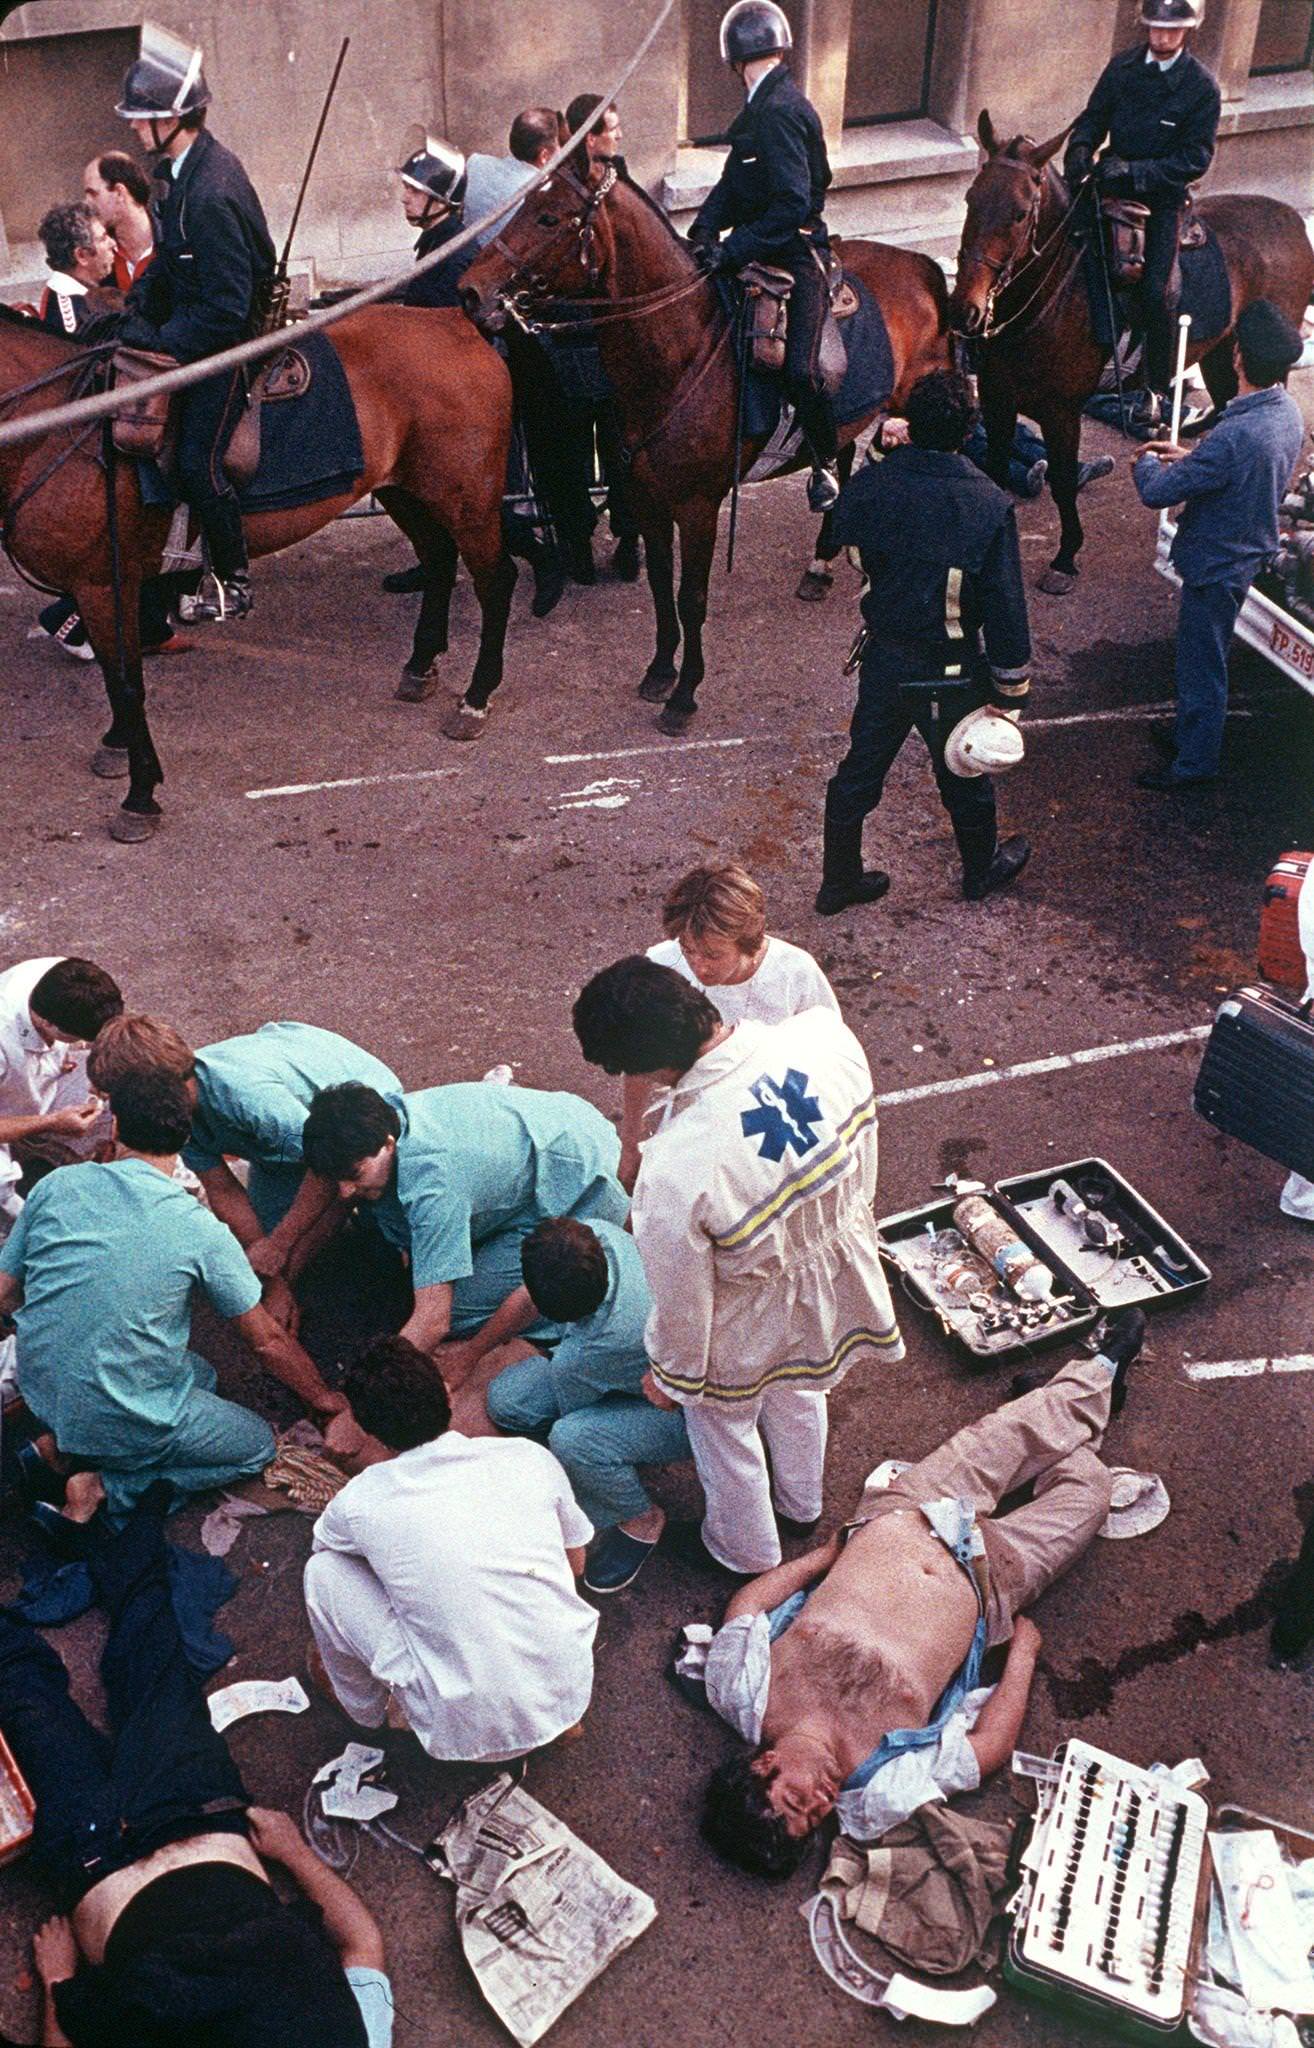 Rescuers attend victims after Heysel Stadium disaster, European Cup Final, 1985.